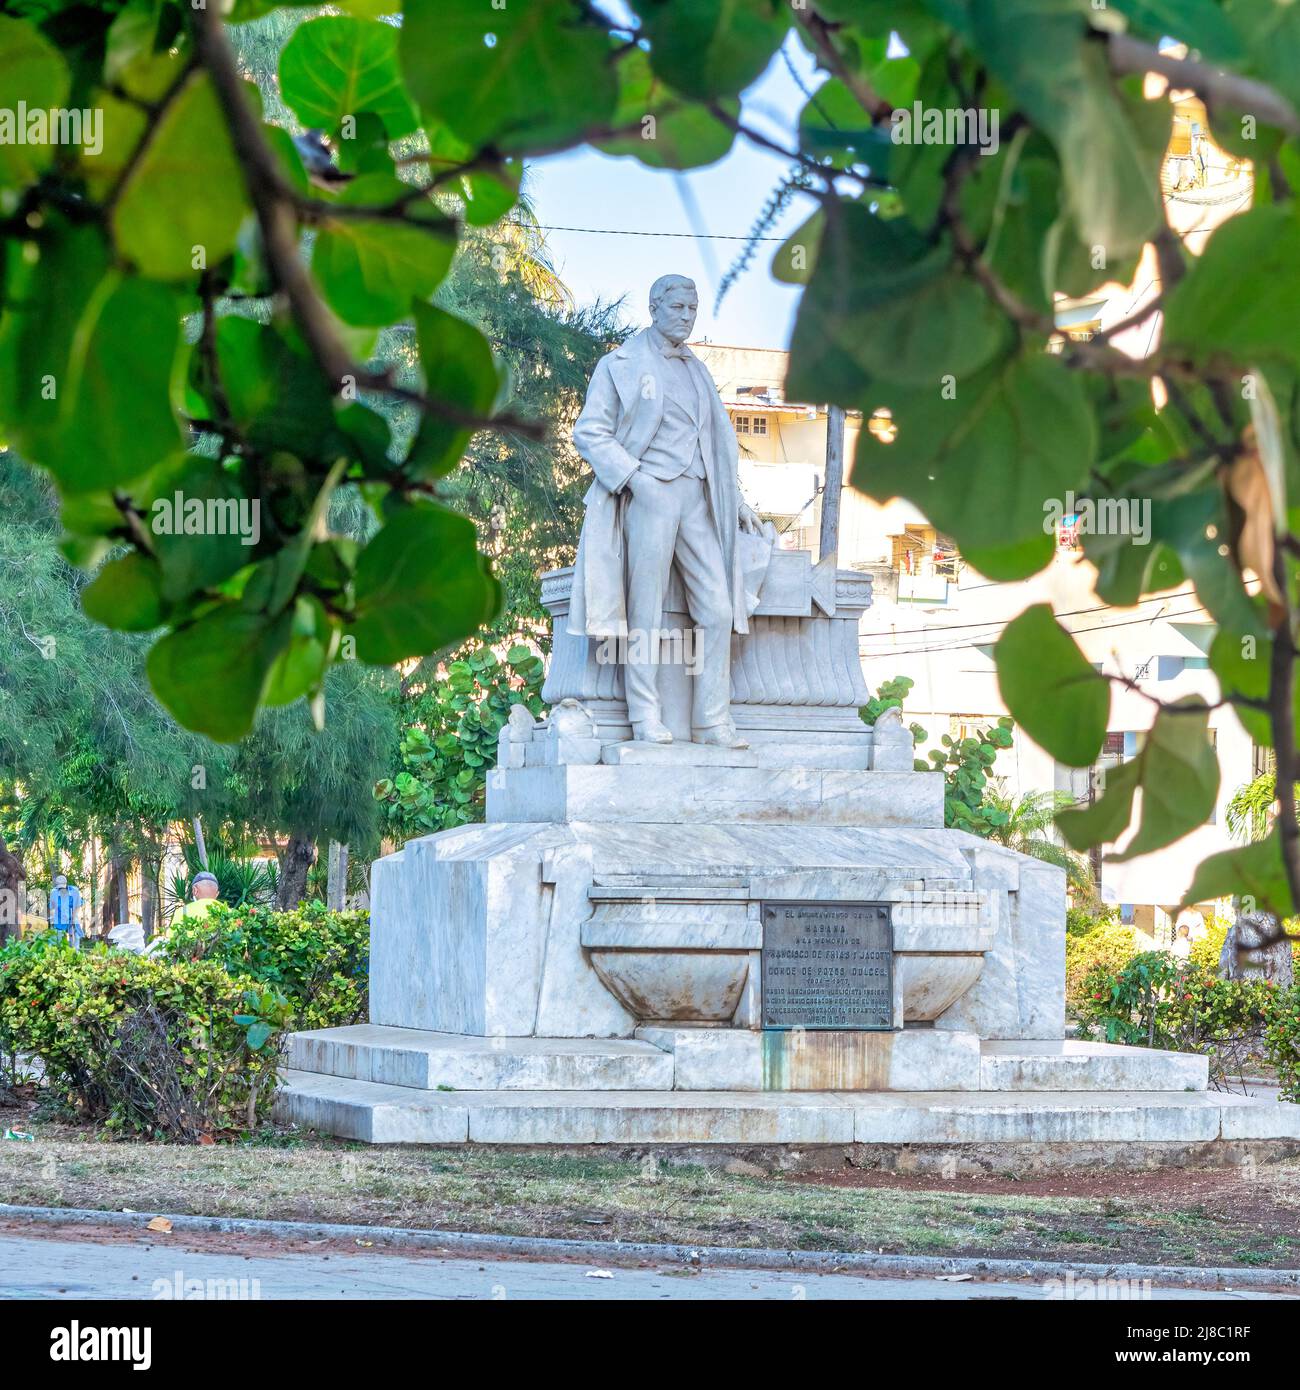 A colonial white marble statue honoring Francisco de Frias y Jacott, Conde de Pozos Dulces. The sculpture is located in a public park in the capital c Stock Photo